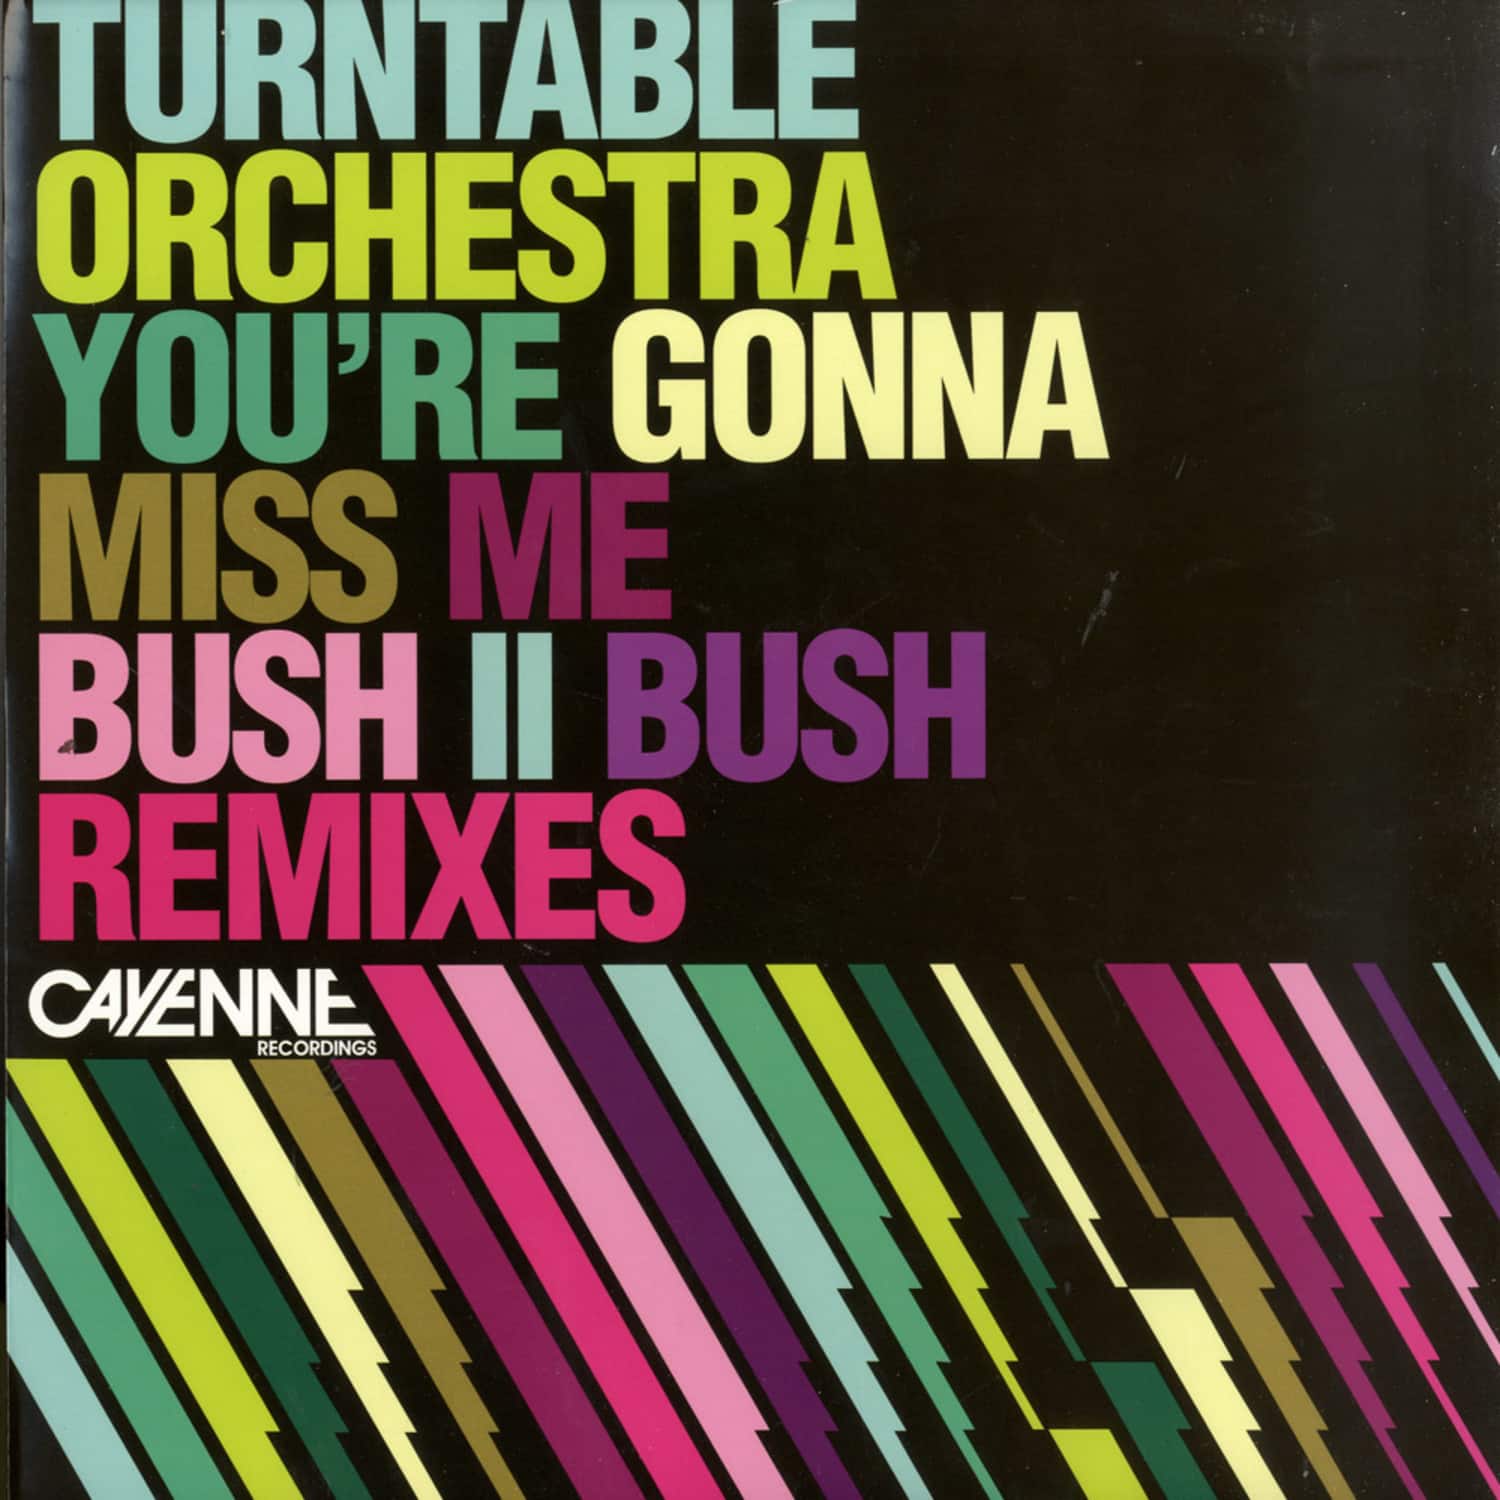 Turntable Orchestra - YOU RE GONNA MISS ME